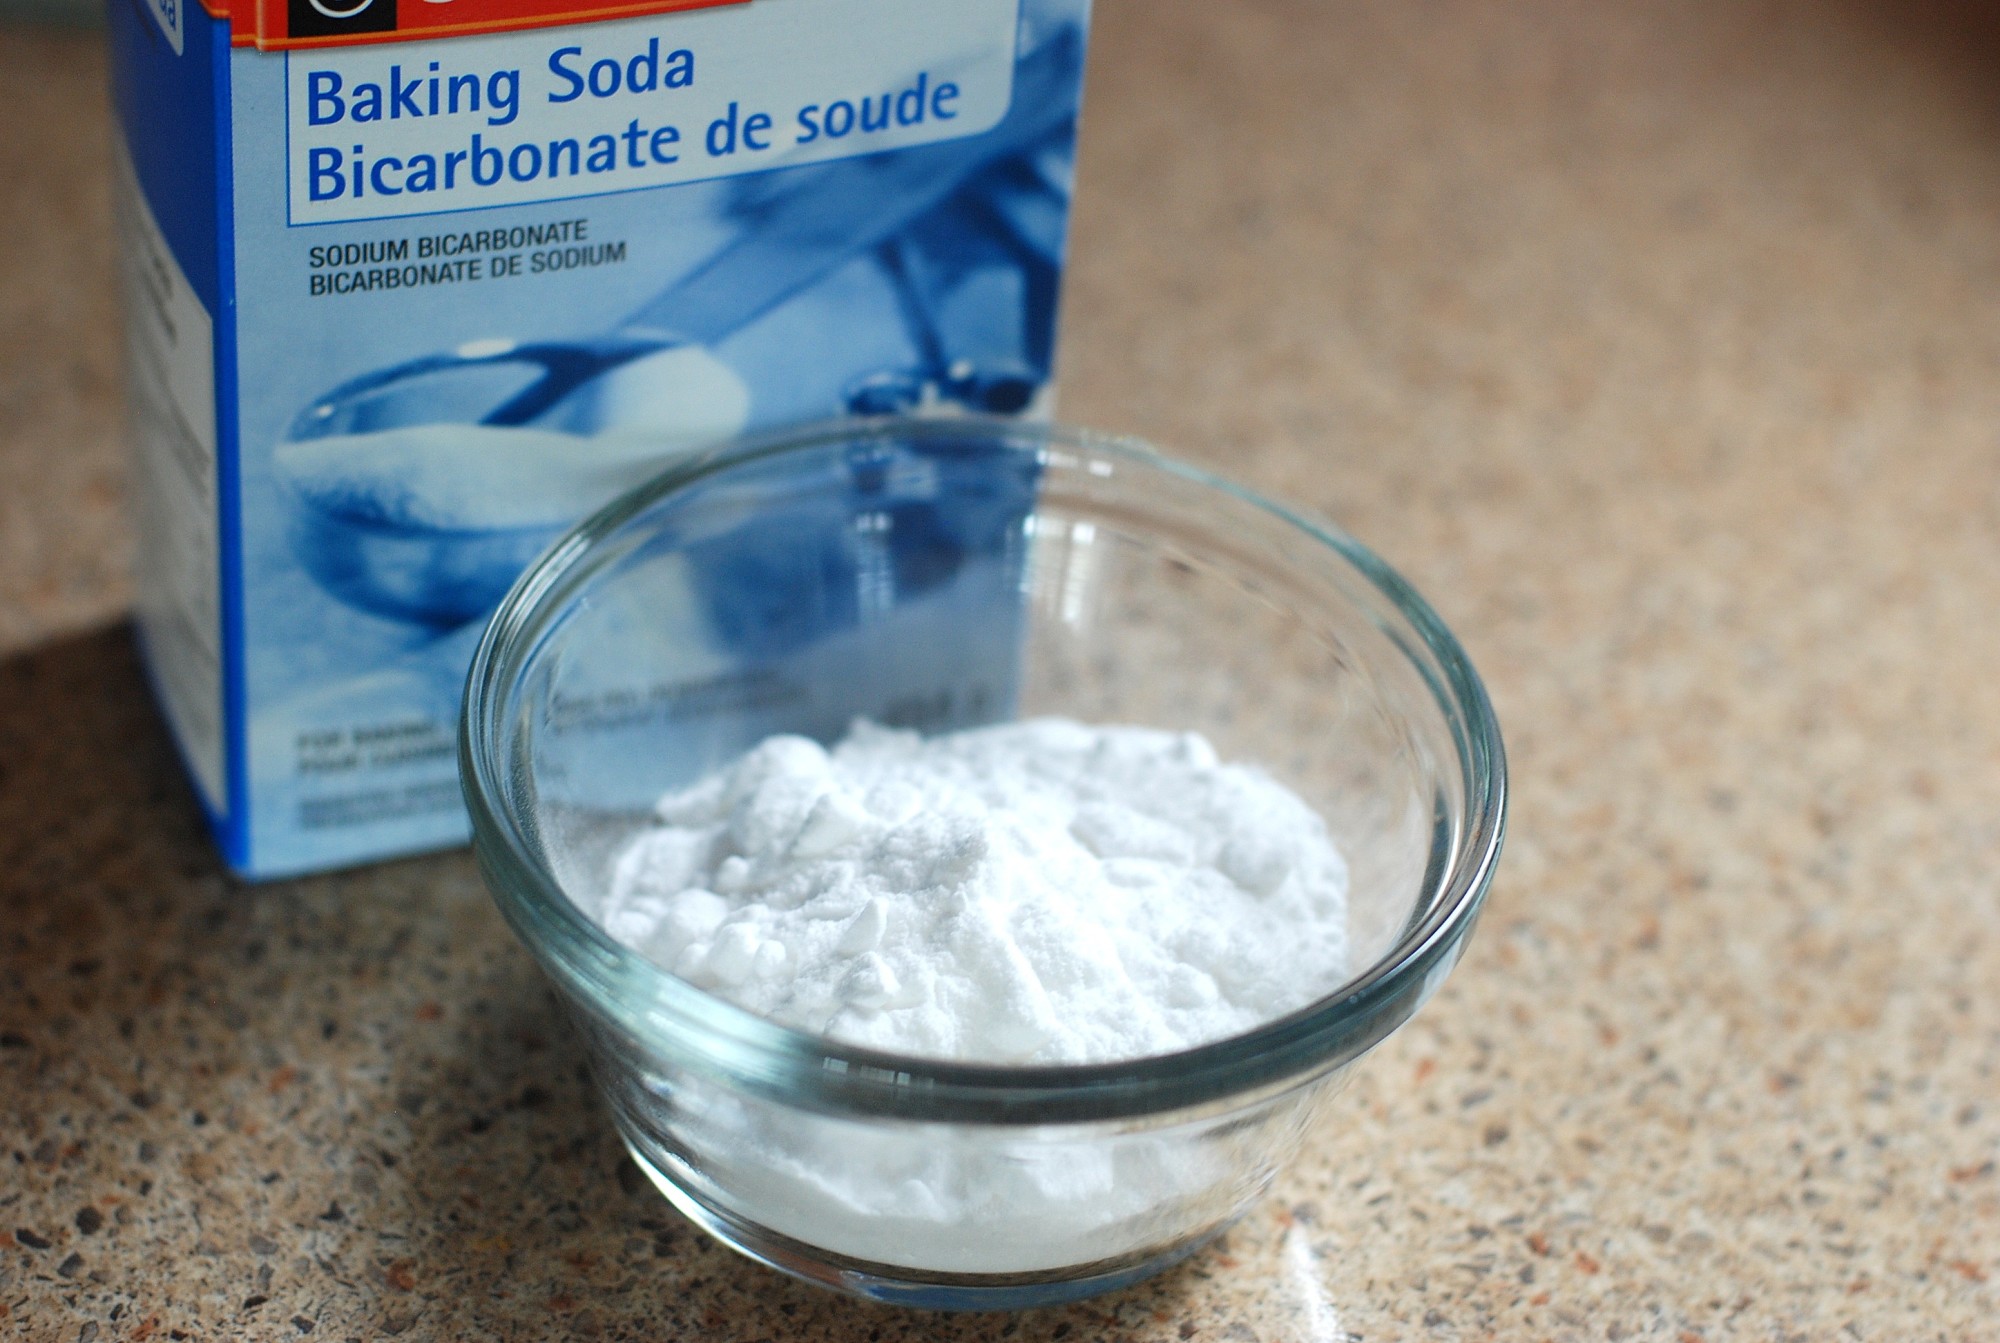 Baking Soda for Making a House Smell Good